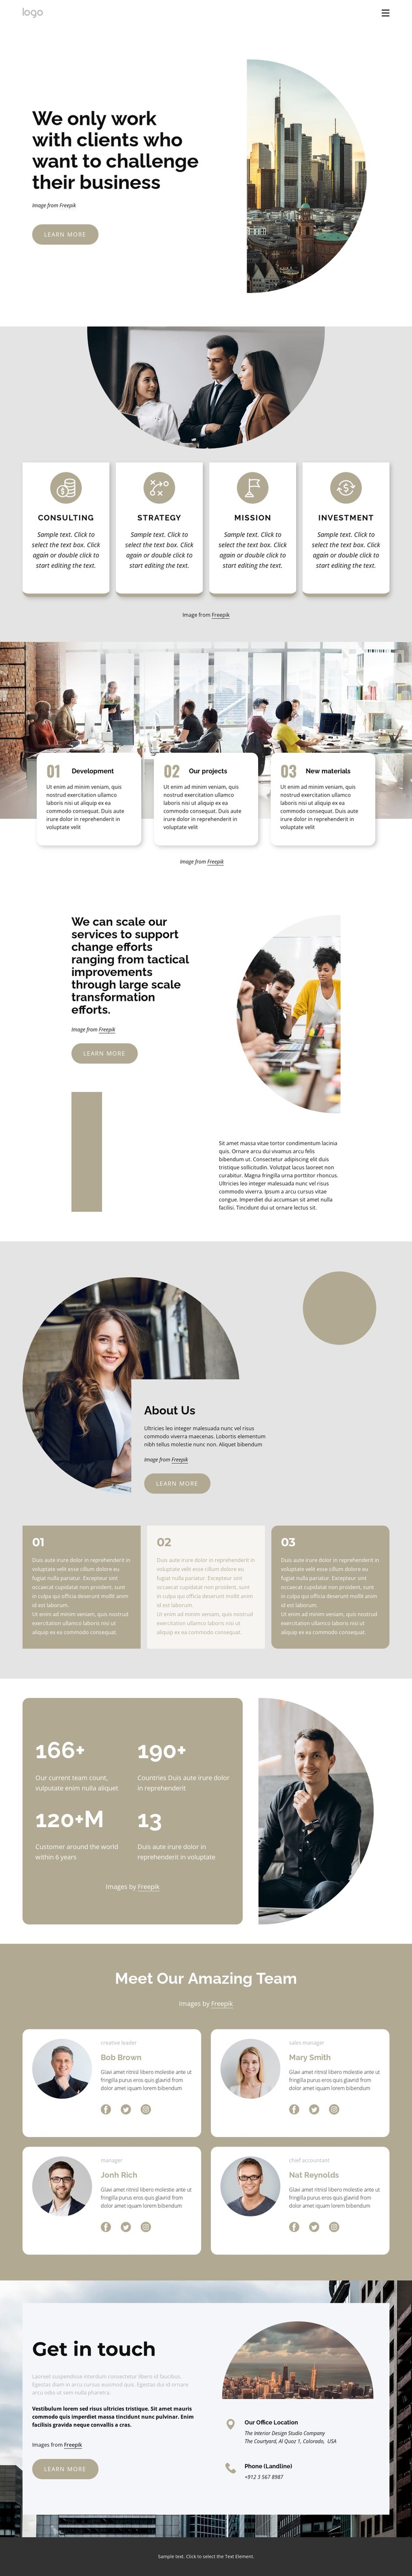 Customer success consultants HTML5 Template